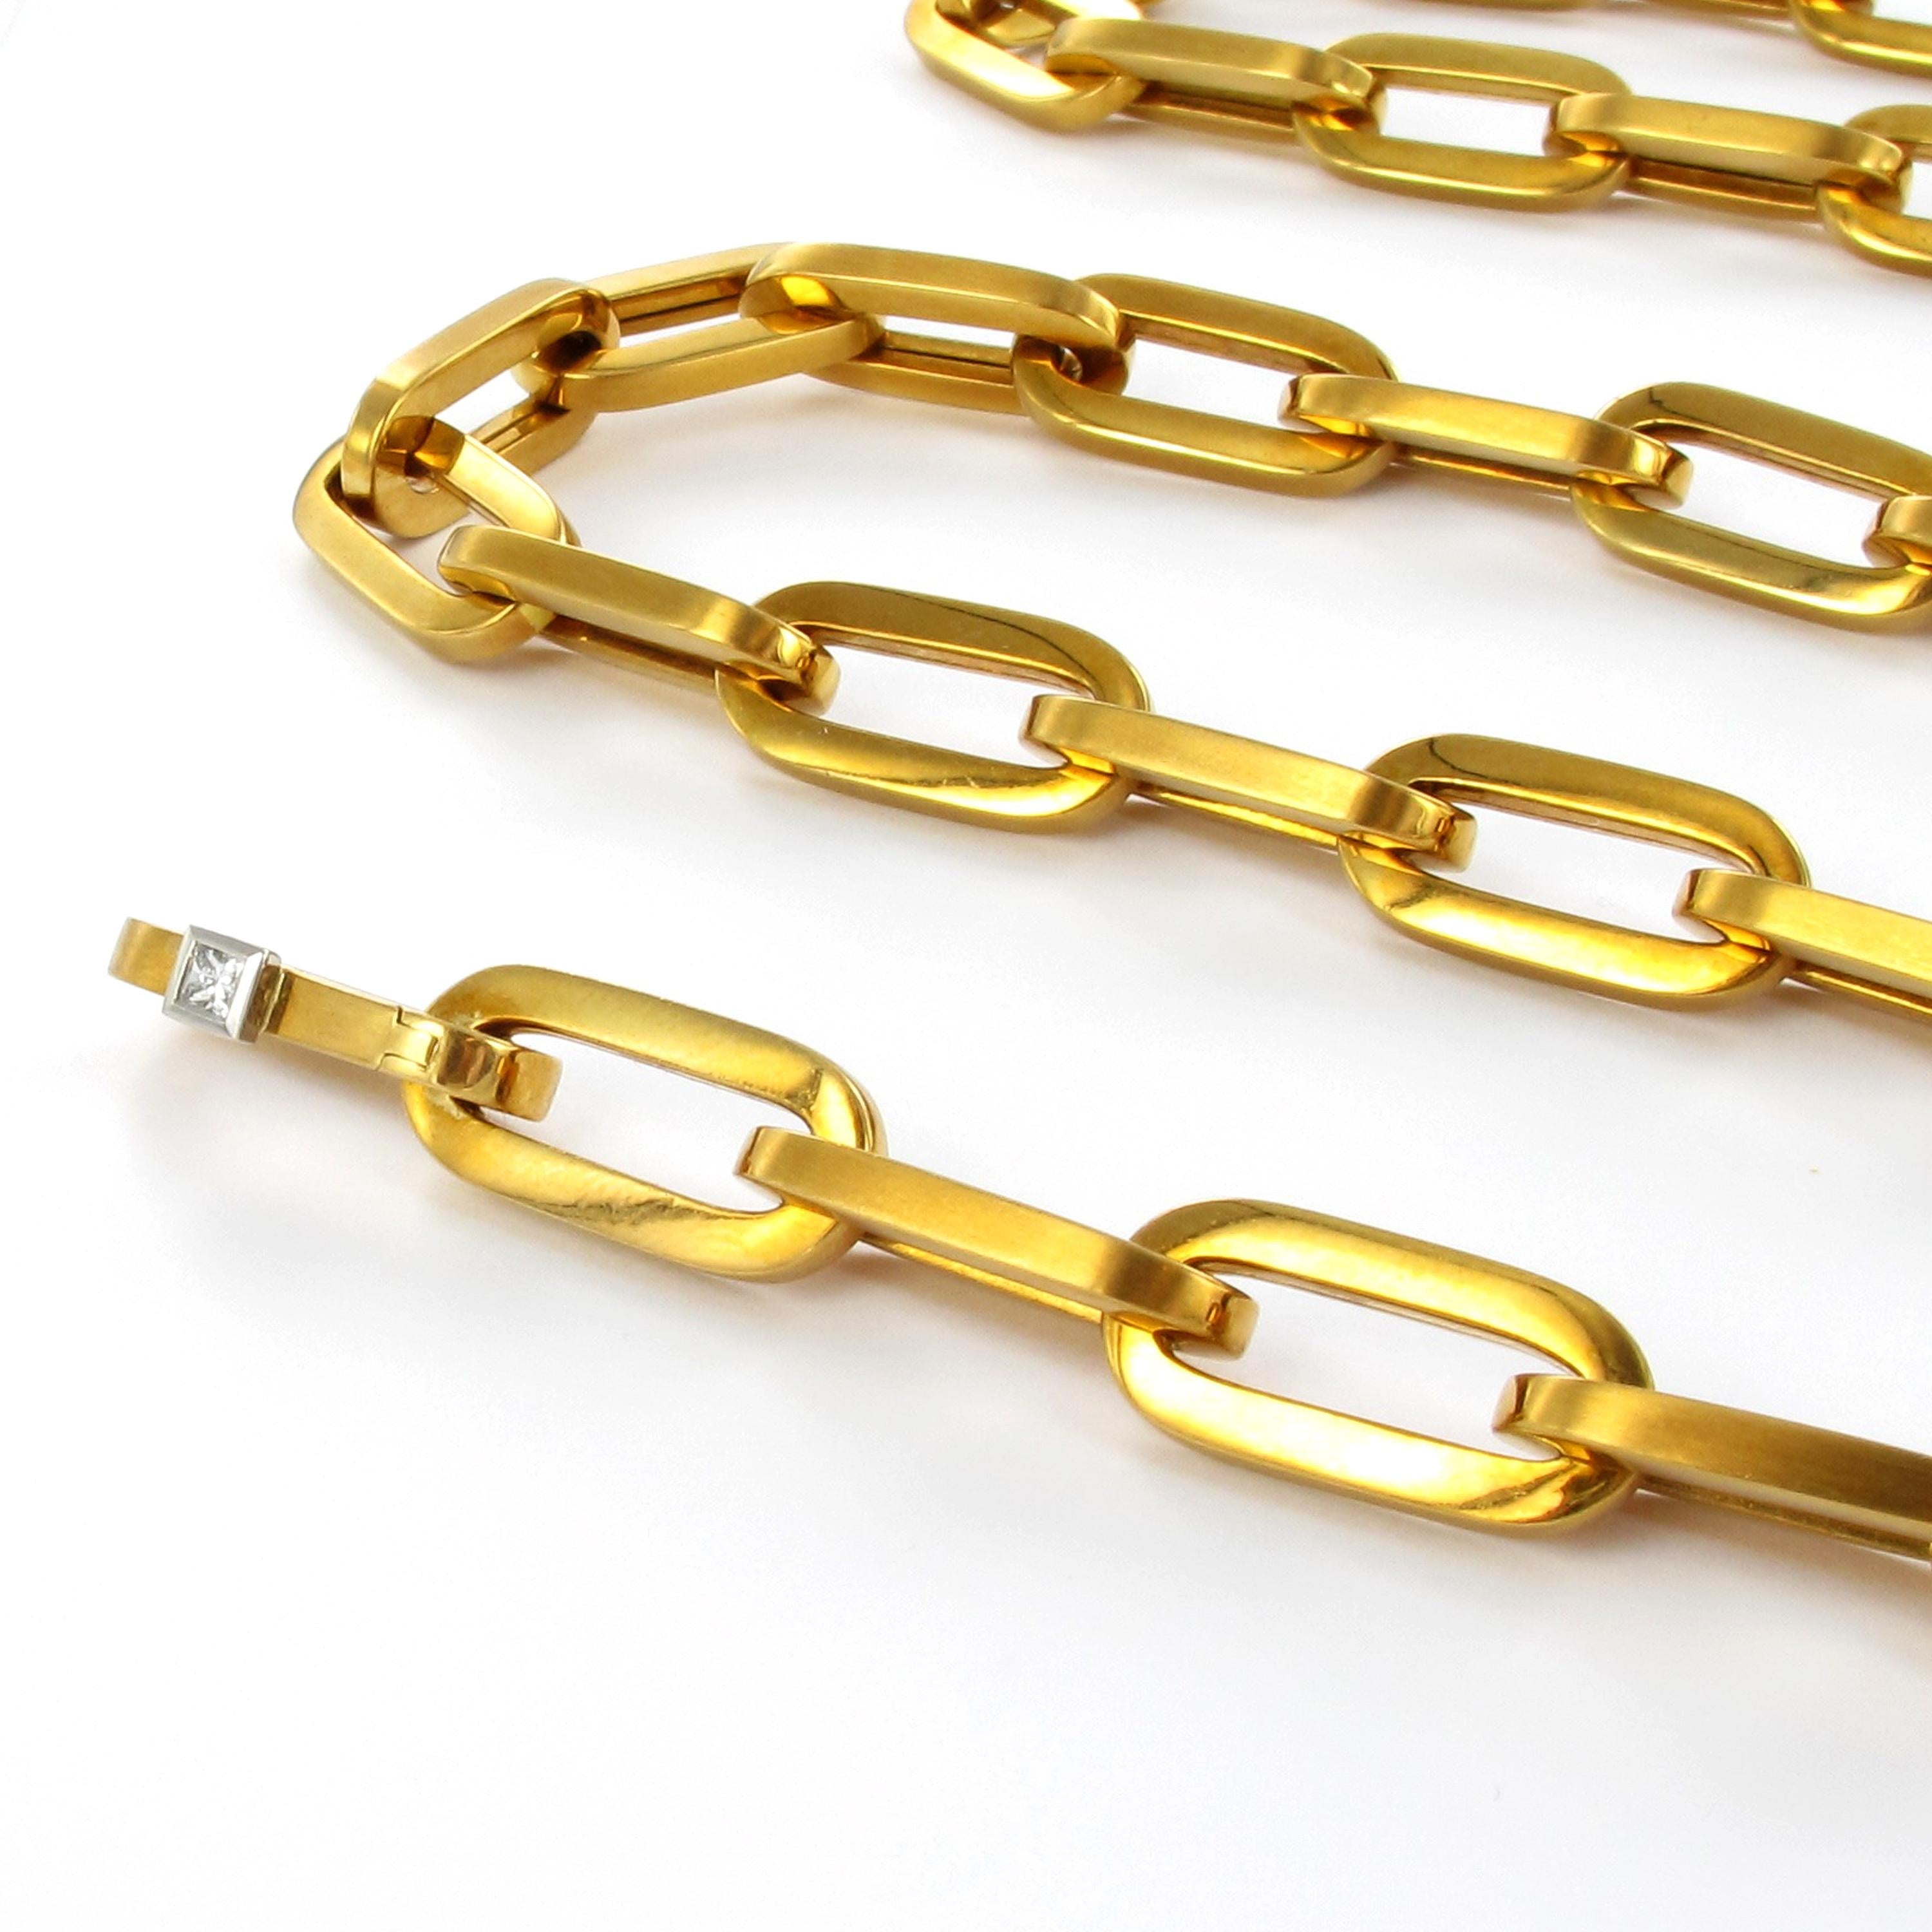 Classic necklace by IsabelleFa from its Linéaire line. Beautifully handcrafted from 18 karat yellow gold. Designed as longish oval elements with straight sides and rounded ends. 

A little diamond marks the hidden clasp and shows where the bracelet